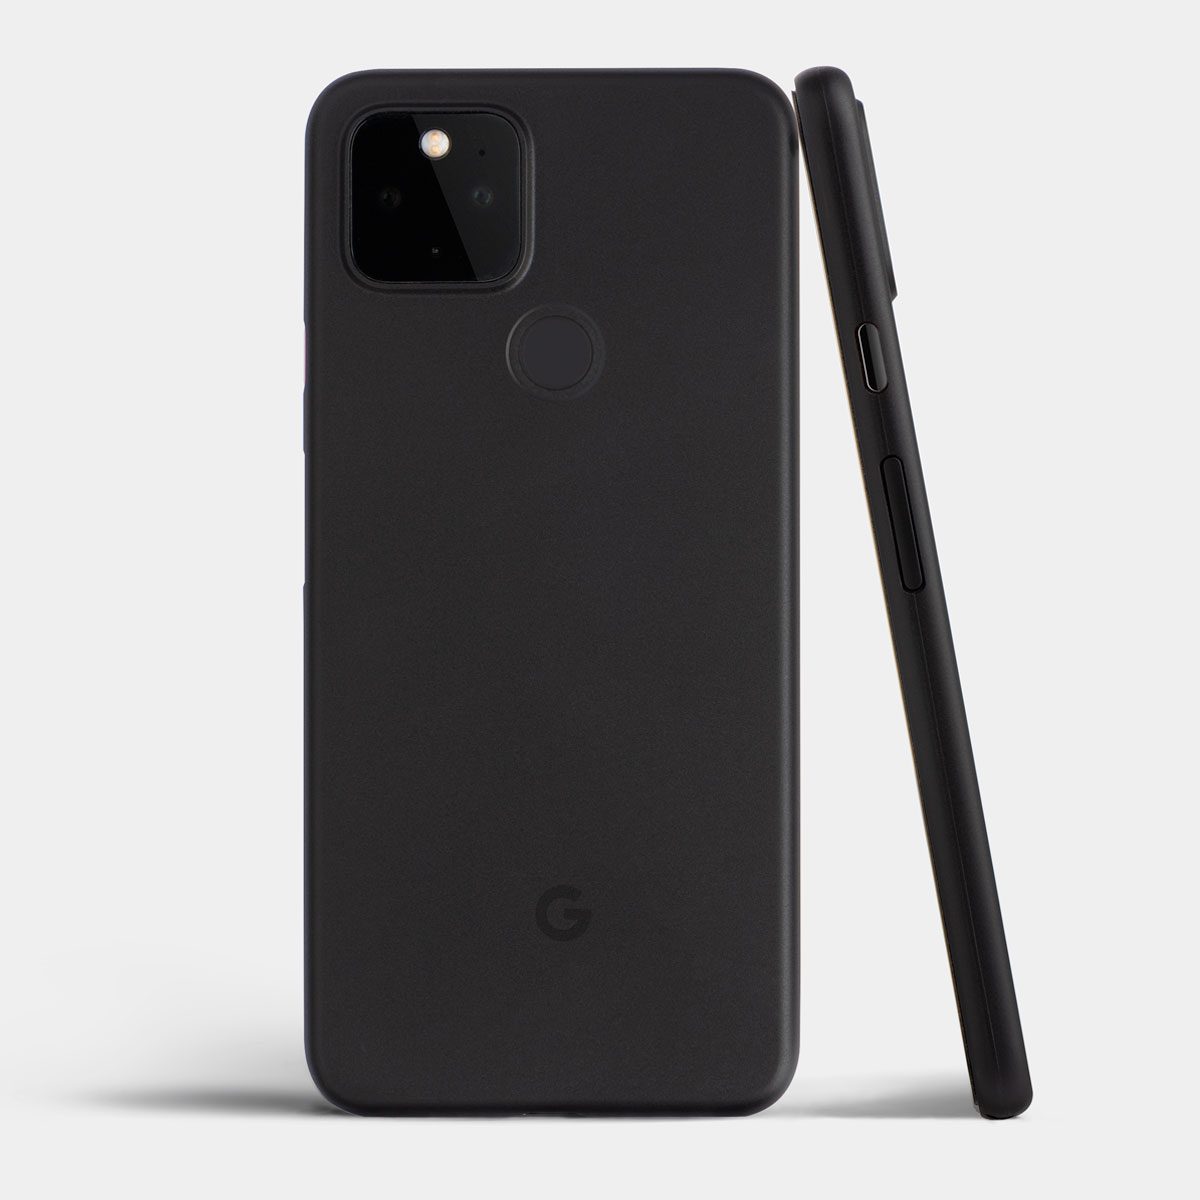 Totallee Pixel 5 Cases Announced 3